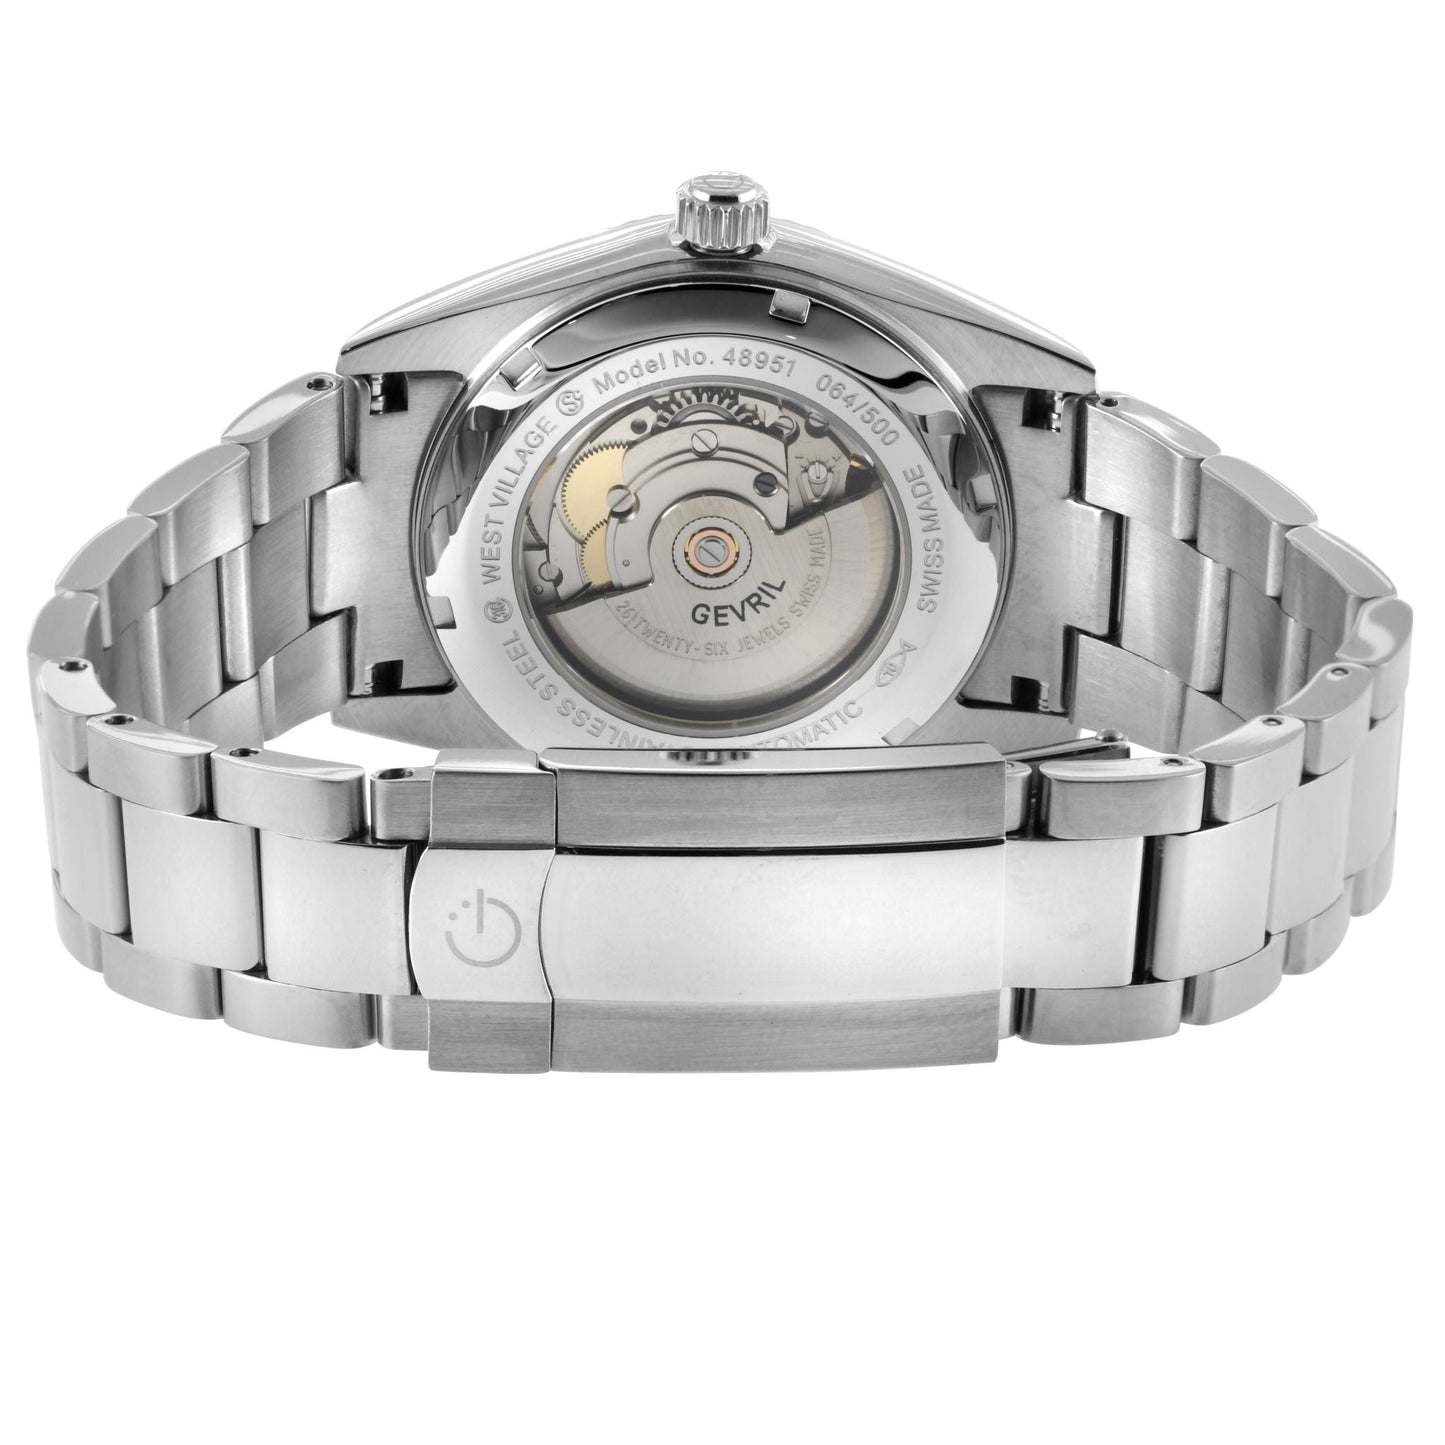 Gevril-Luxury-Swiss-Watches-Gevril West Village - Automatic-48951B